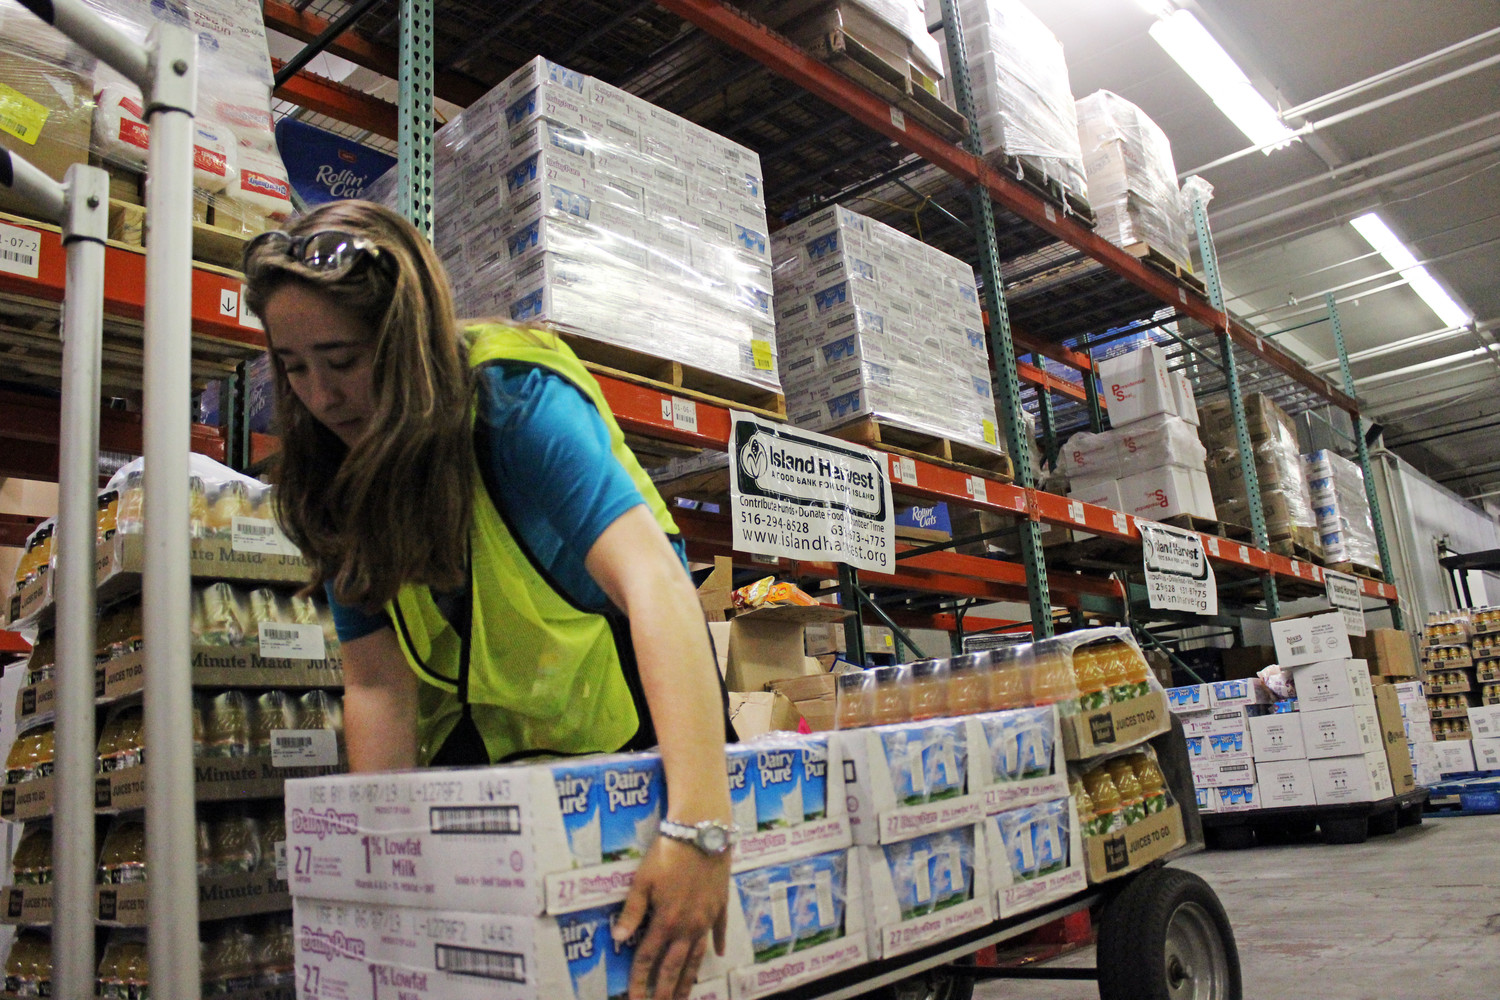 Island Harvest Food Bank and Jovia Financial Credit Union — formally NEFCU — will be providing meals to hundreds of affected by the Covid-19 pandemic. Above, Noelle Roth, was interning at Island Harvest and gathering food to distribute to students.